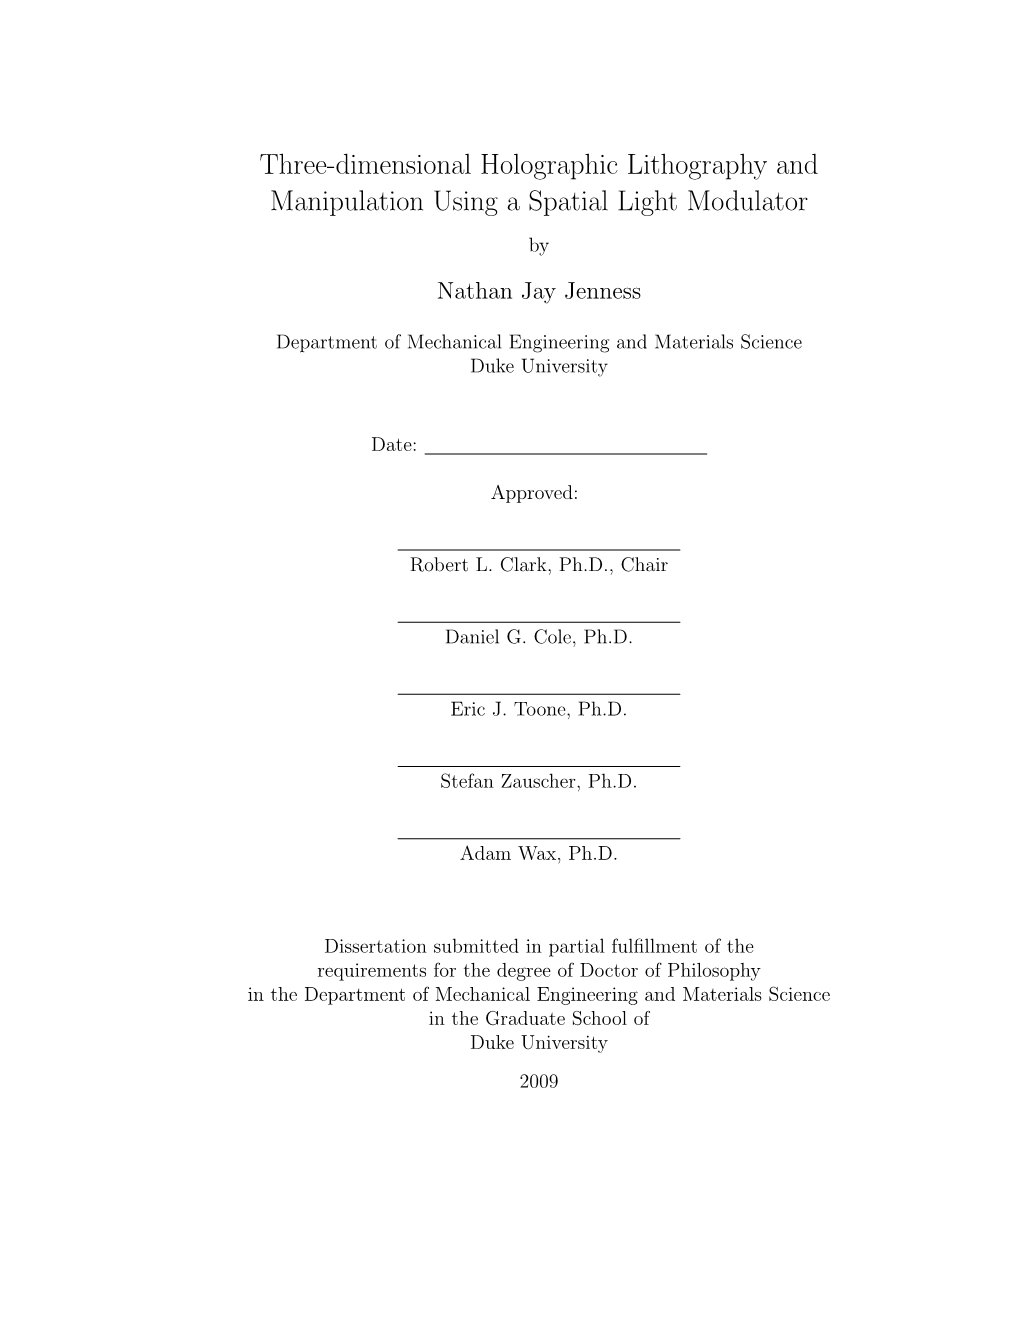 Three-Dimensional Holographic Lithography and Manipulation Using a Spatial Light Modulator By